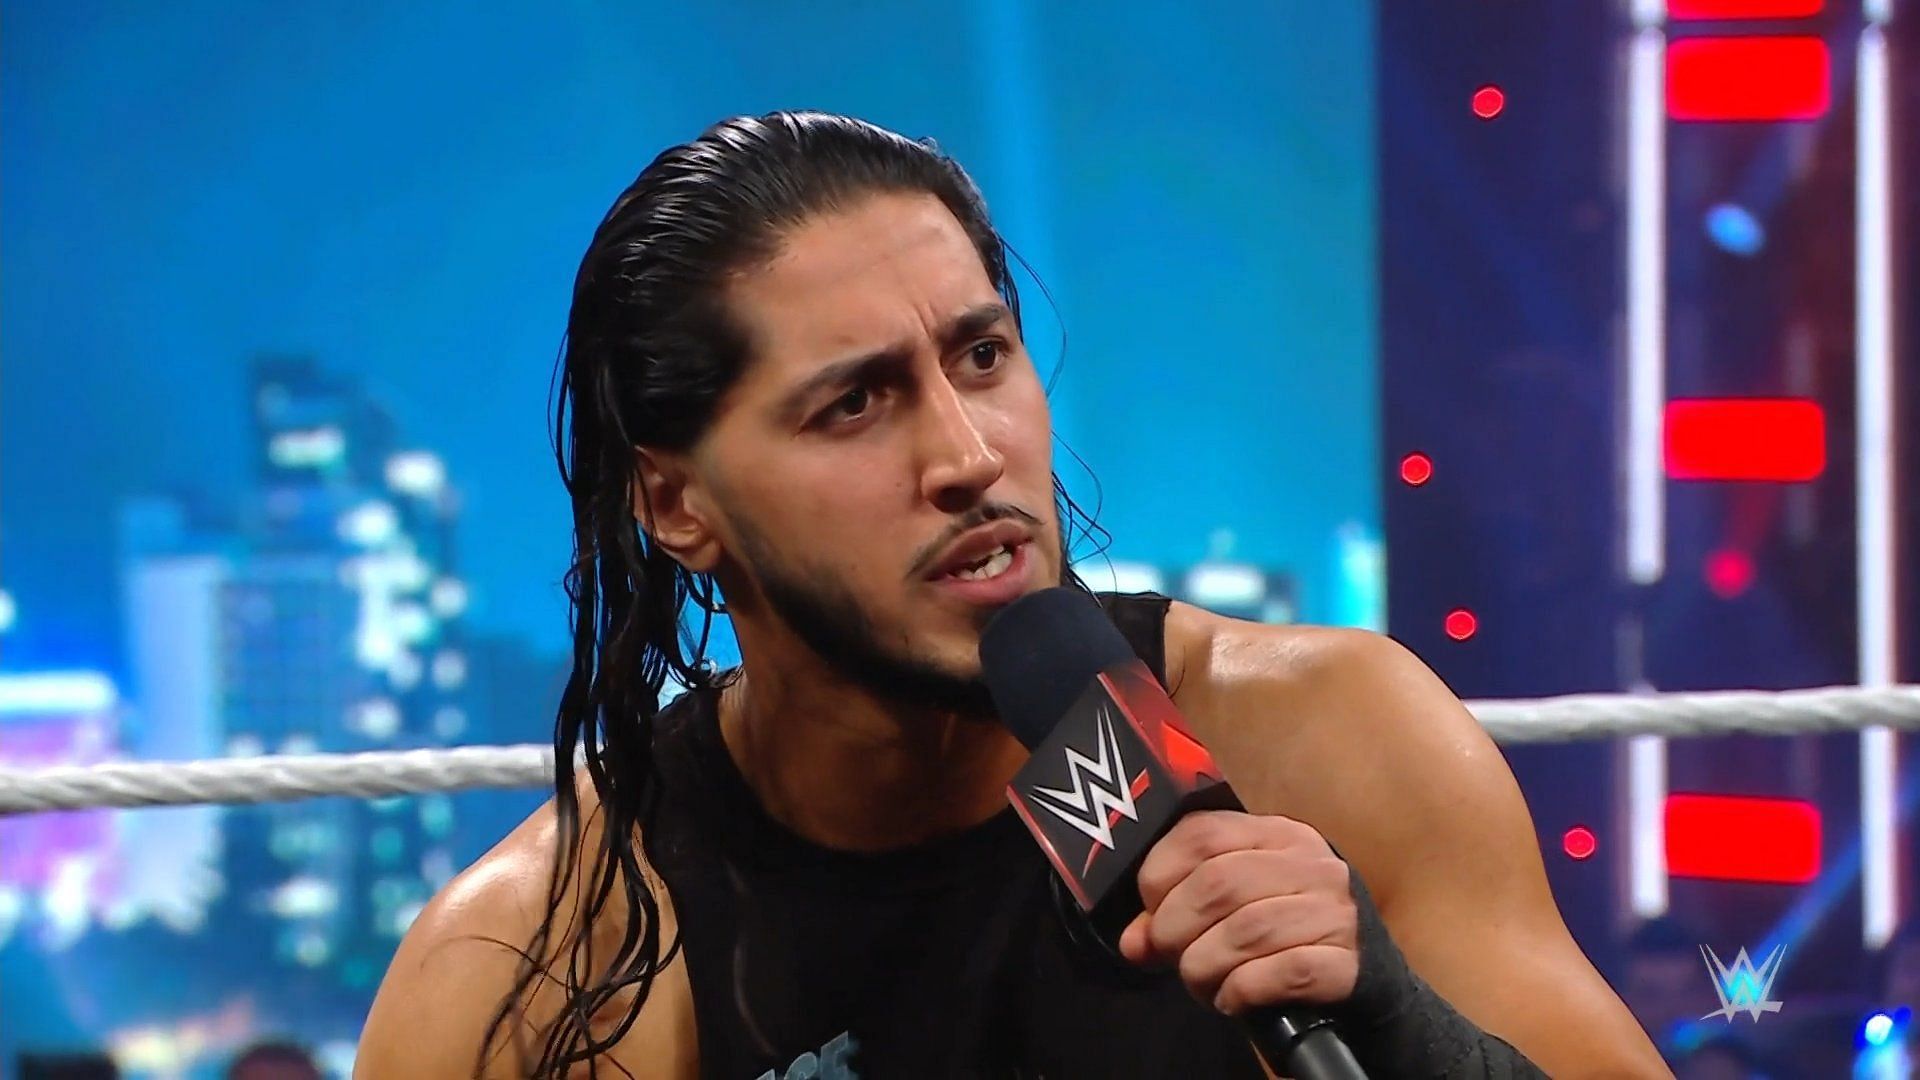 Mustafa Ali made his return to RAW after months away